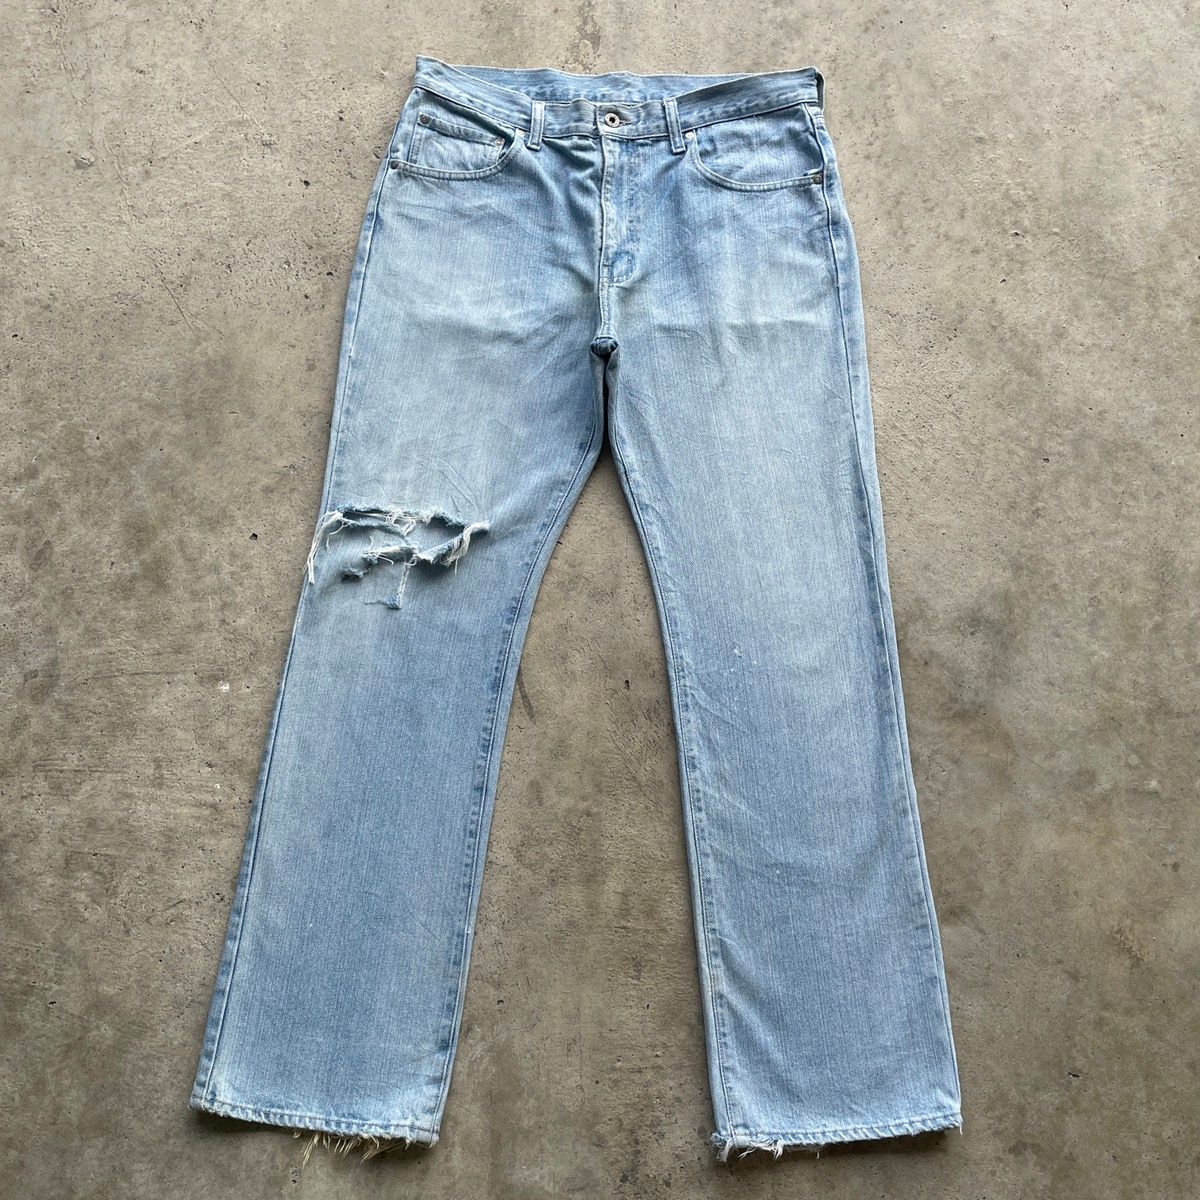 Pre-owned Distressed Denim X Jean Vintage Japanese Straight Faded Denim Jeans Pants Distressed In Faded Blue